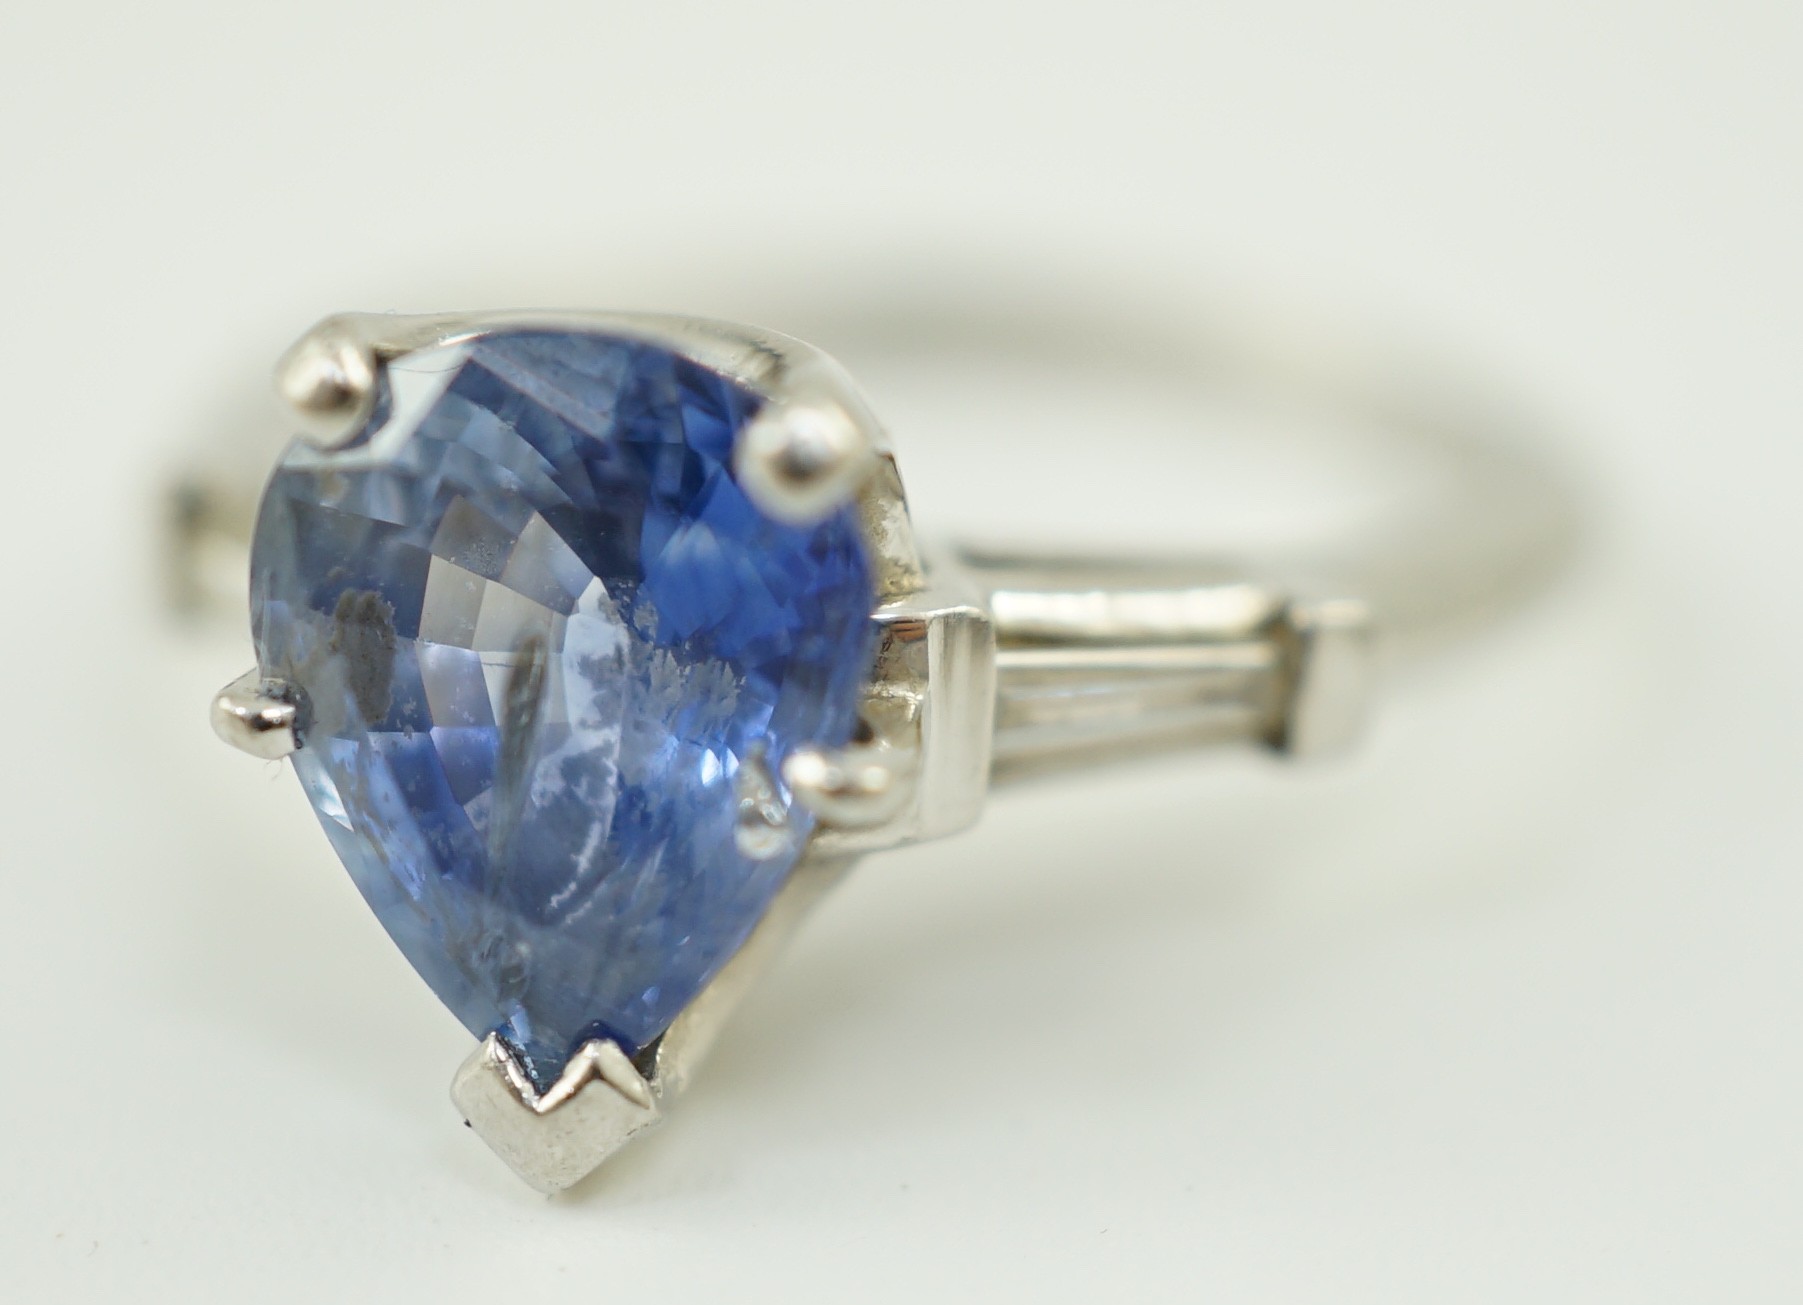 A platinum (10%) and single stone pear cut Ceylon sapphire set ring, with tapered baguette cut diamond set shoulders